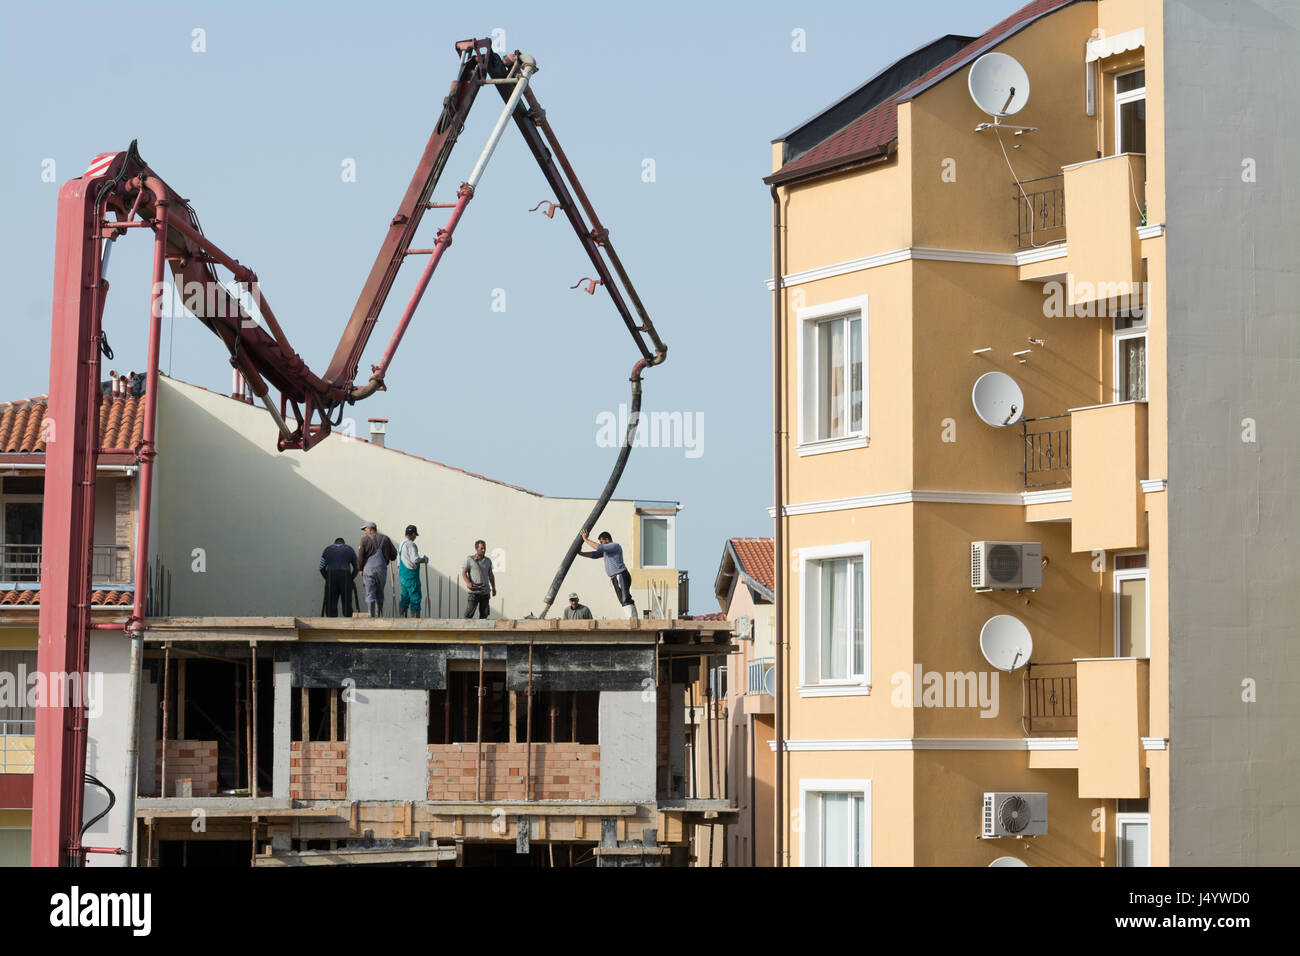 Construction workers are building the new house Stock Photo